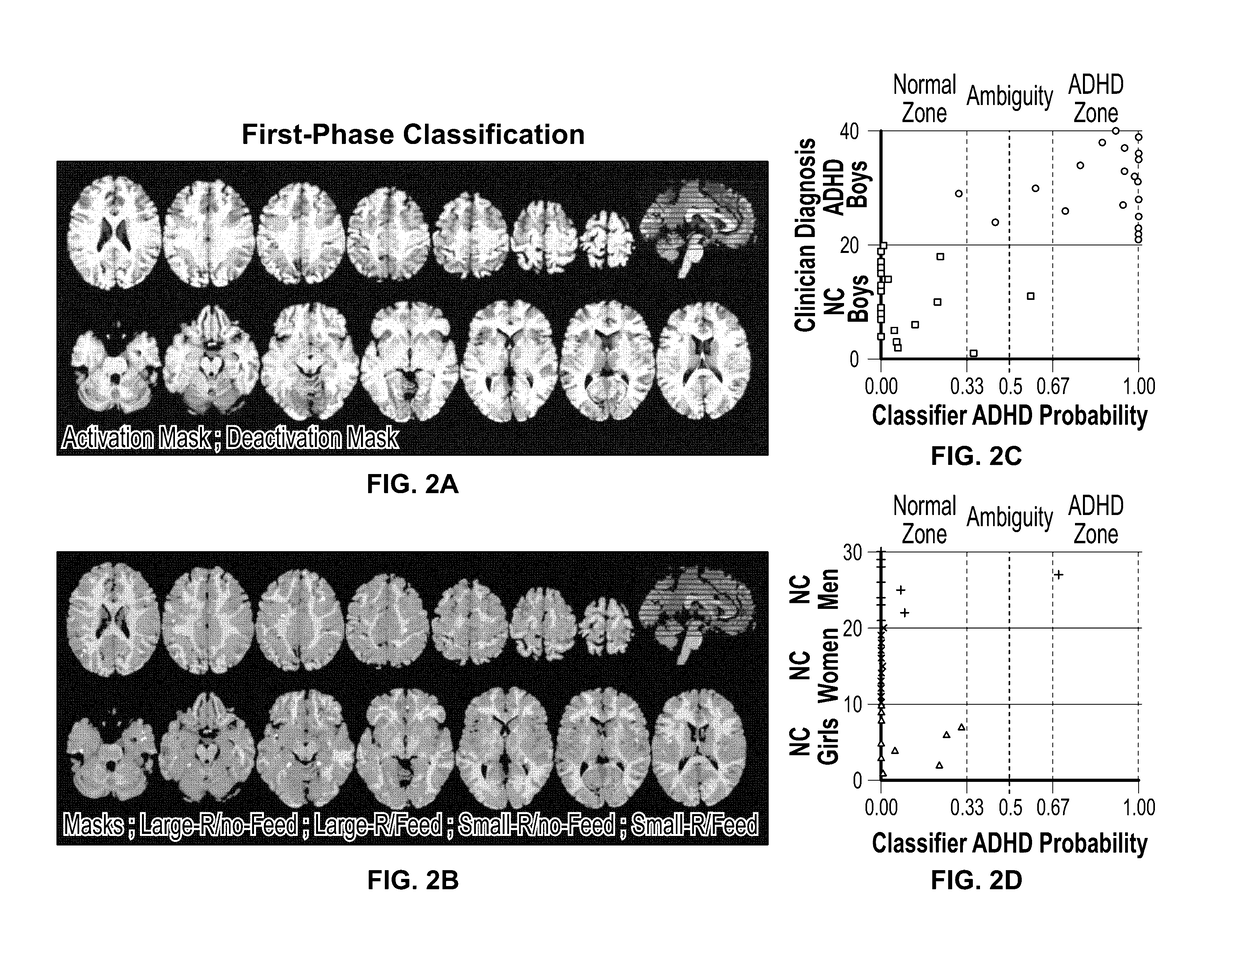 PATTERN ANALYSIS BASED ON fMRI DATA COLLECTED WHILE SUBJECTS PERFORM WORKING MEMORY TASKS ALLOWING HIGH-PRECISION DIAGNOSIS OF ADHD